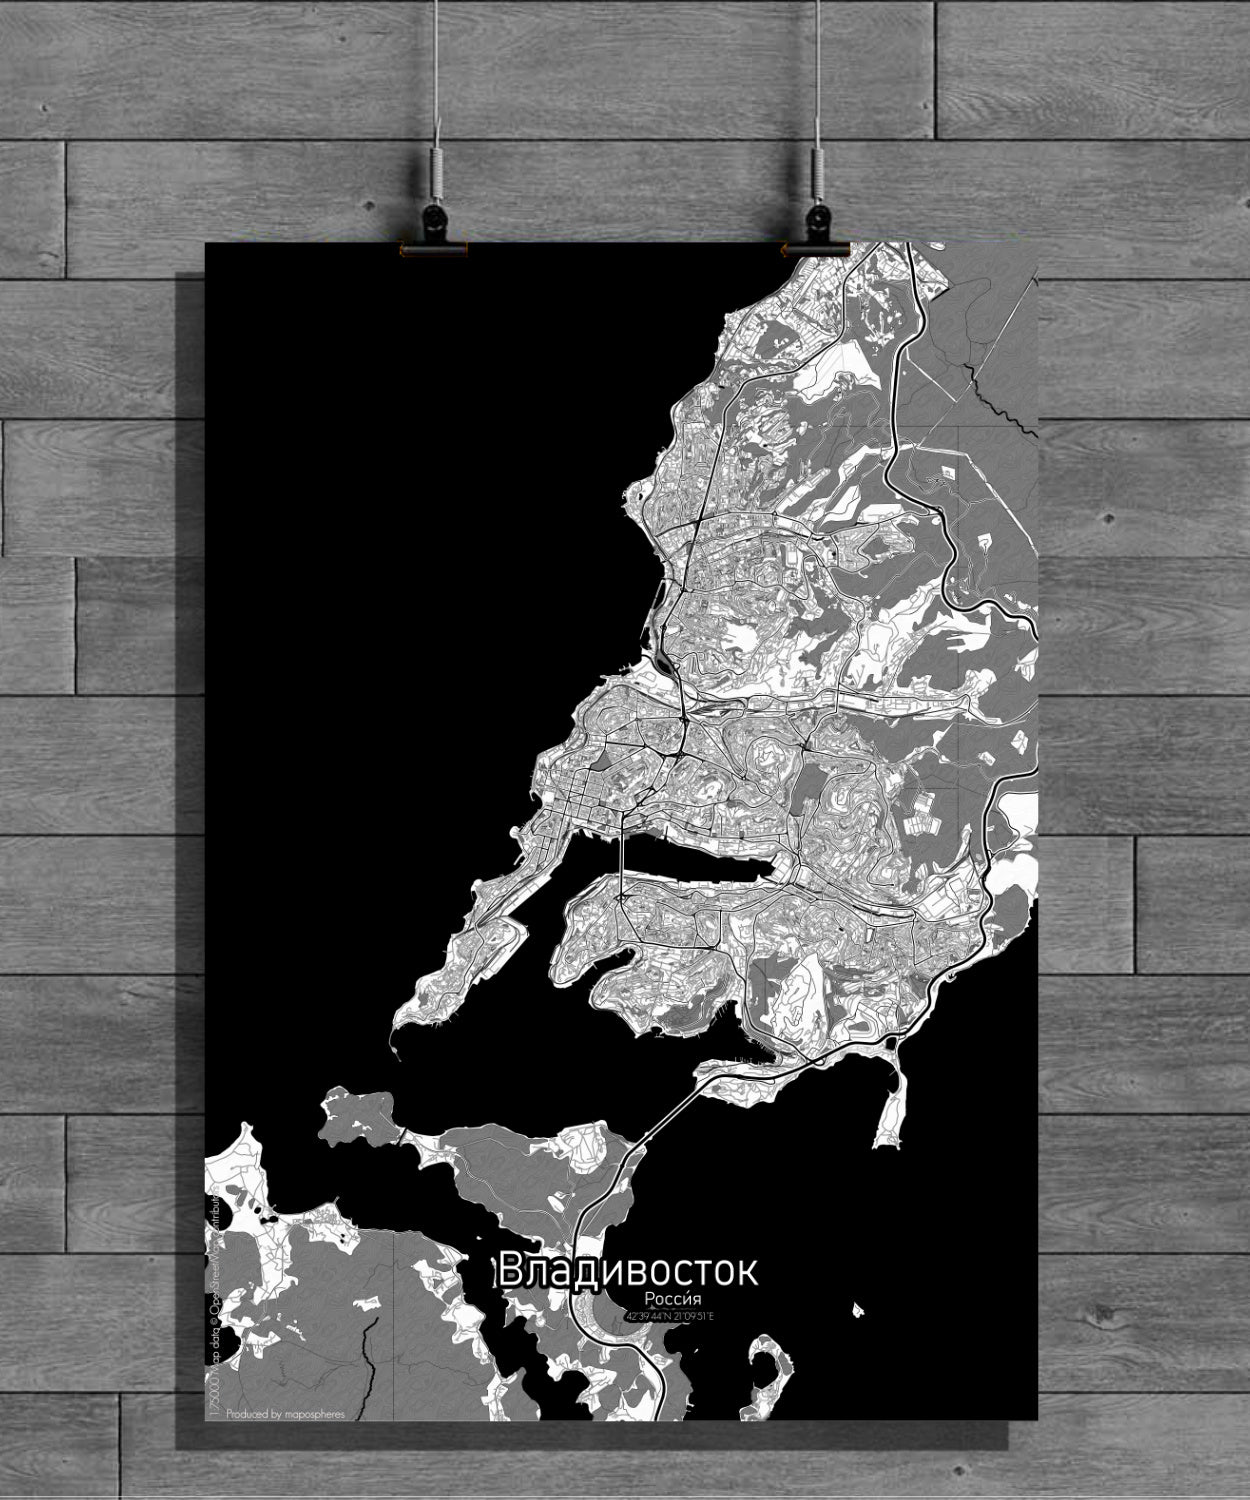 Aberdeen Black and White full page design poster city map